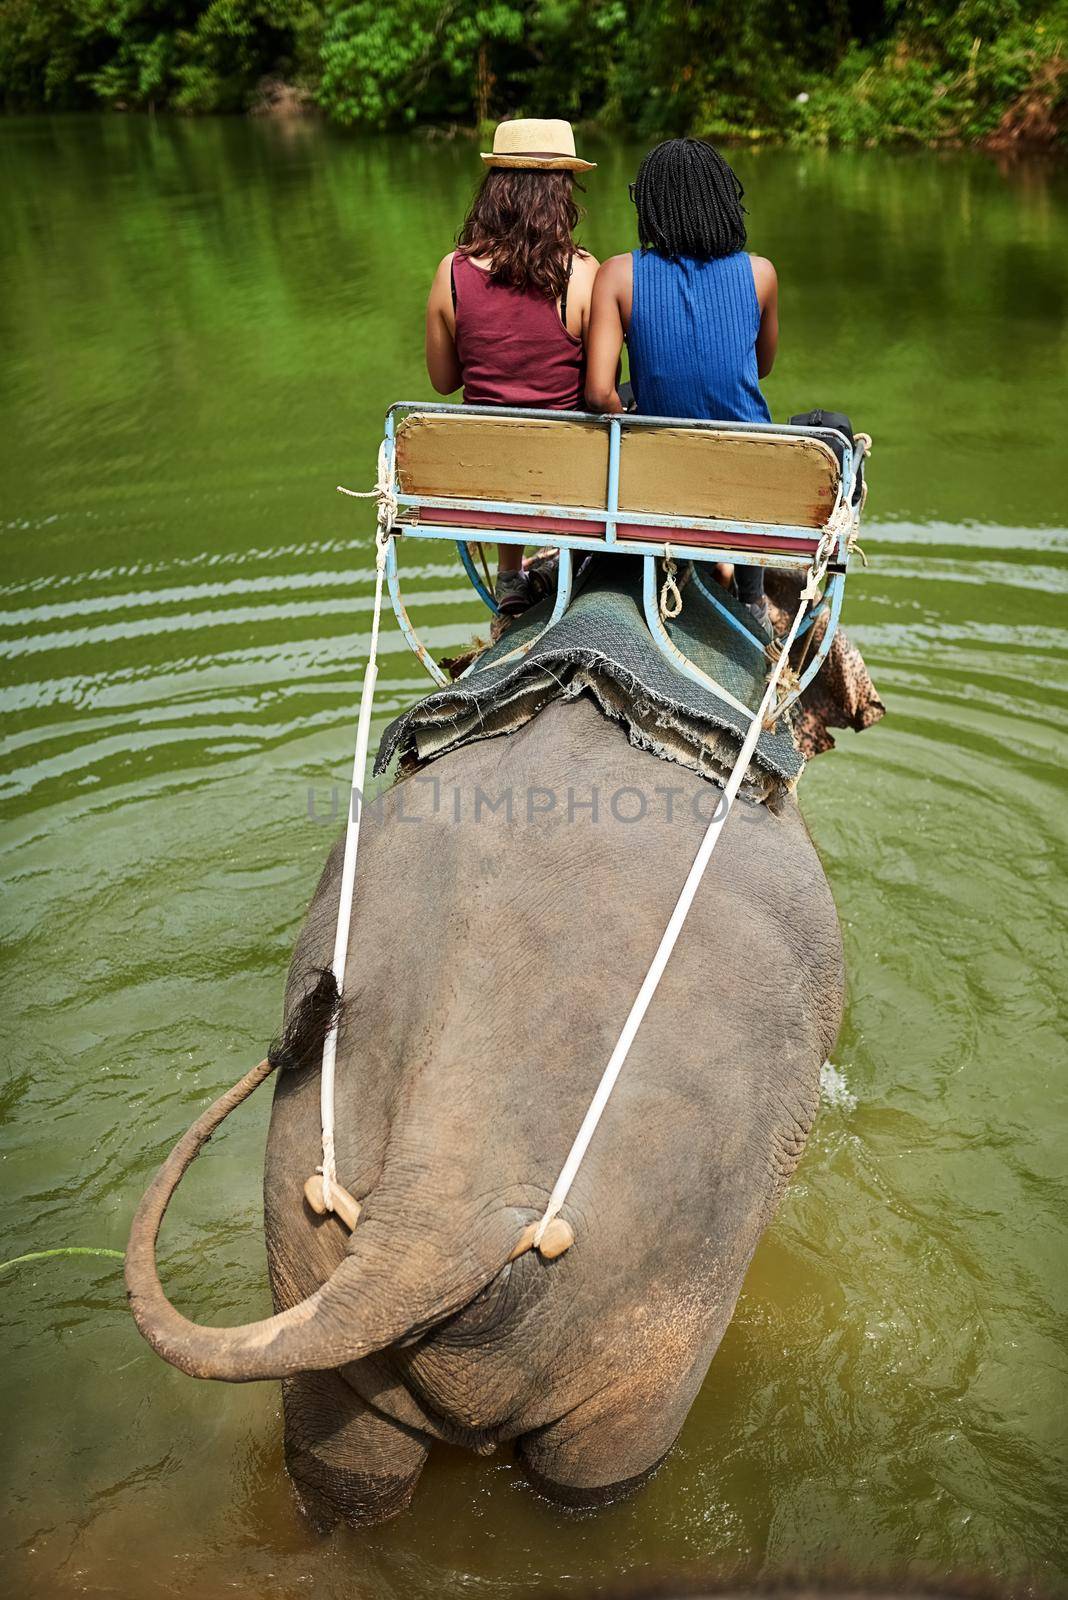 The ultimate bucket list experience. Rear view shot of two young tourists on an elephant ride through a tropical rainforest